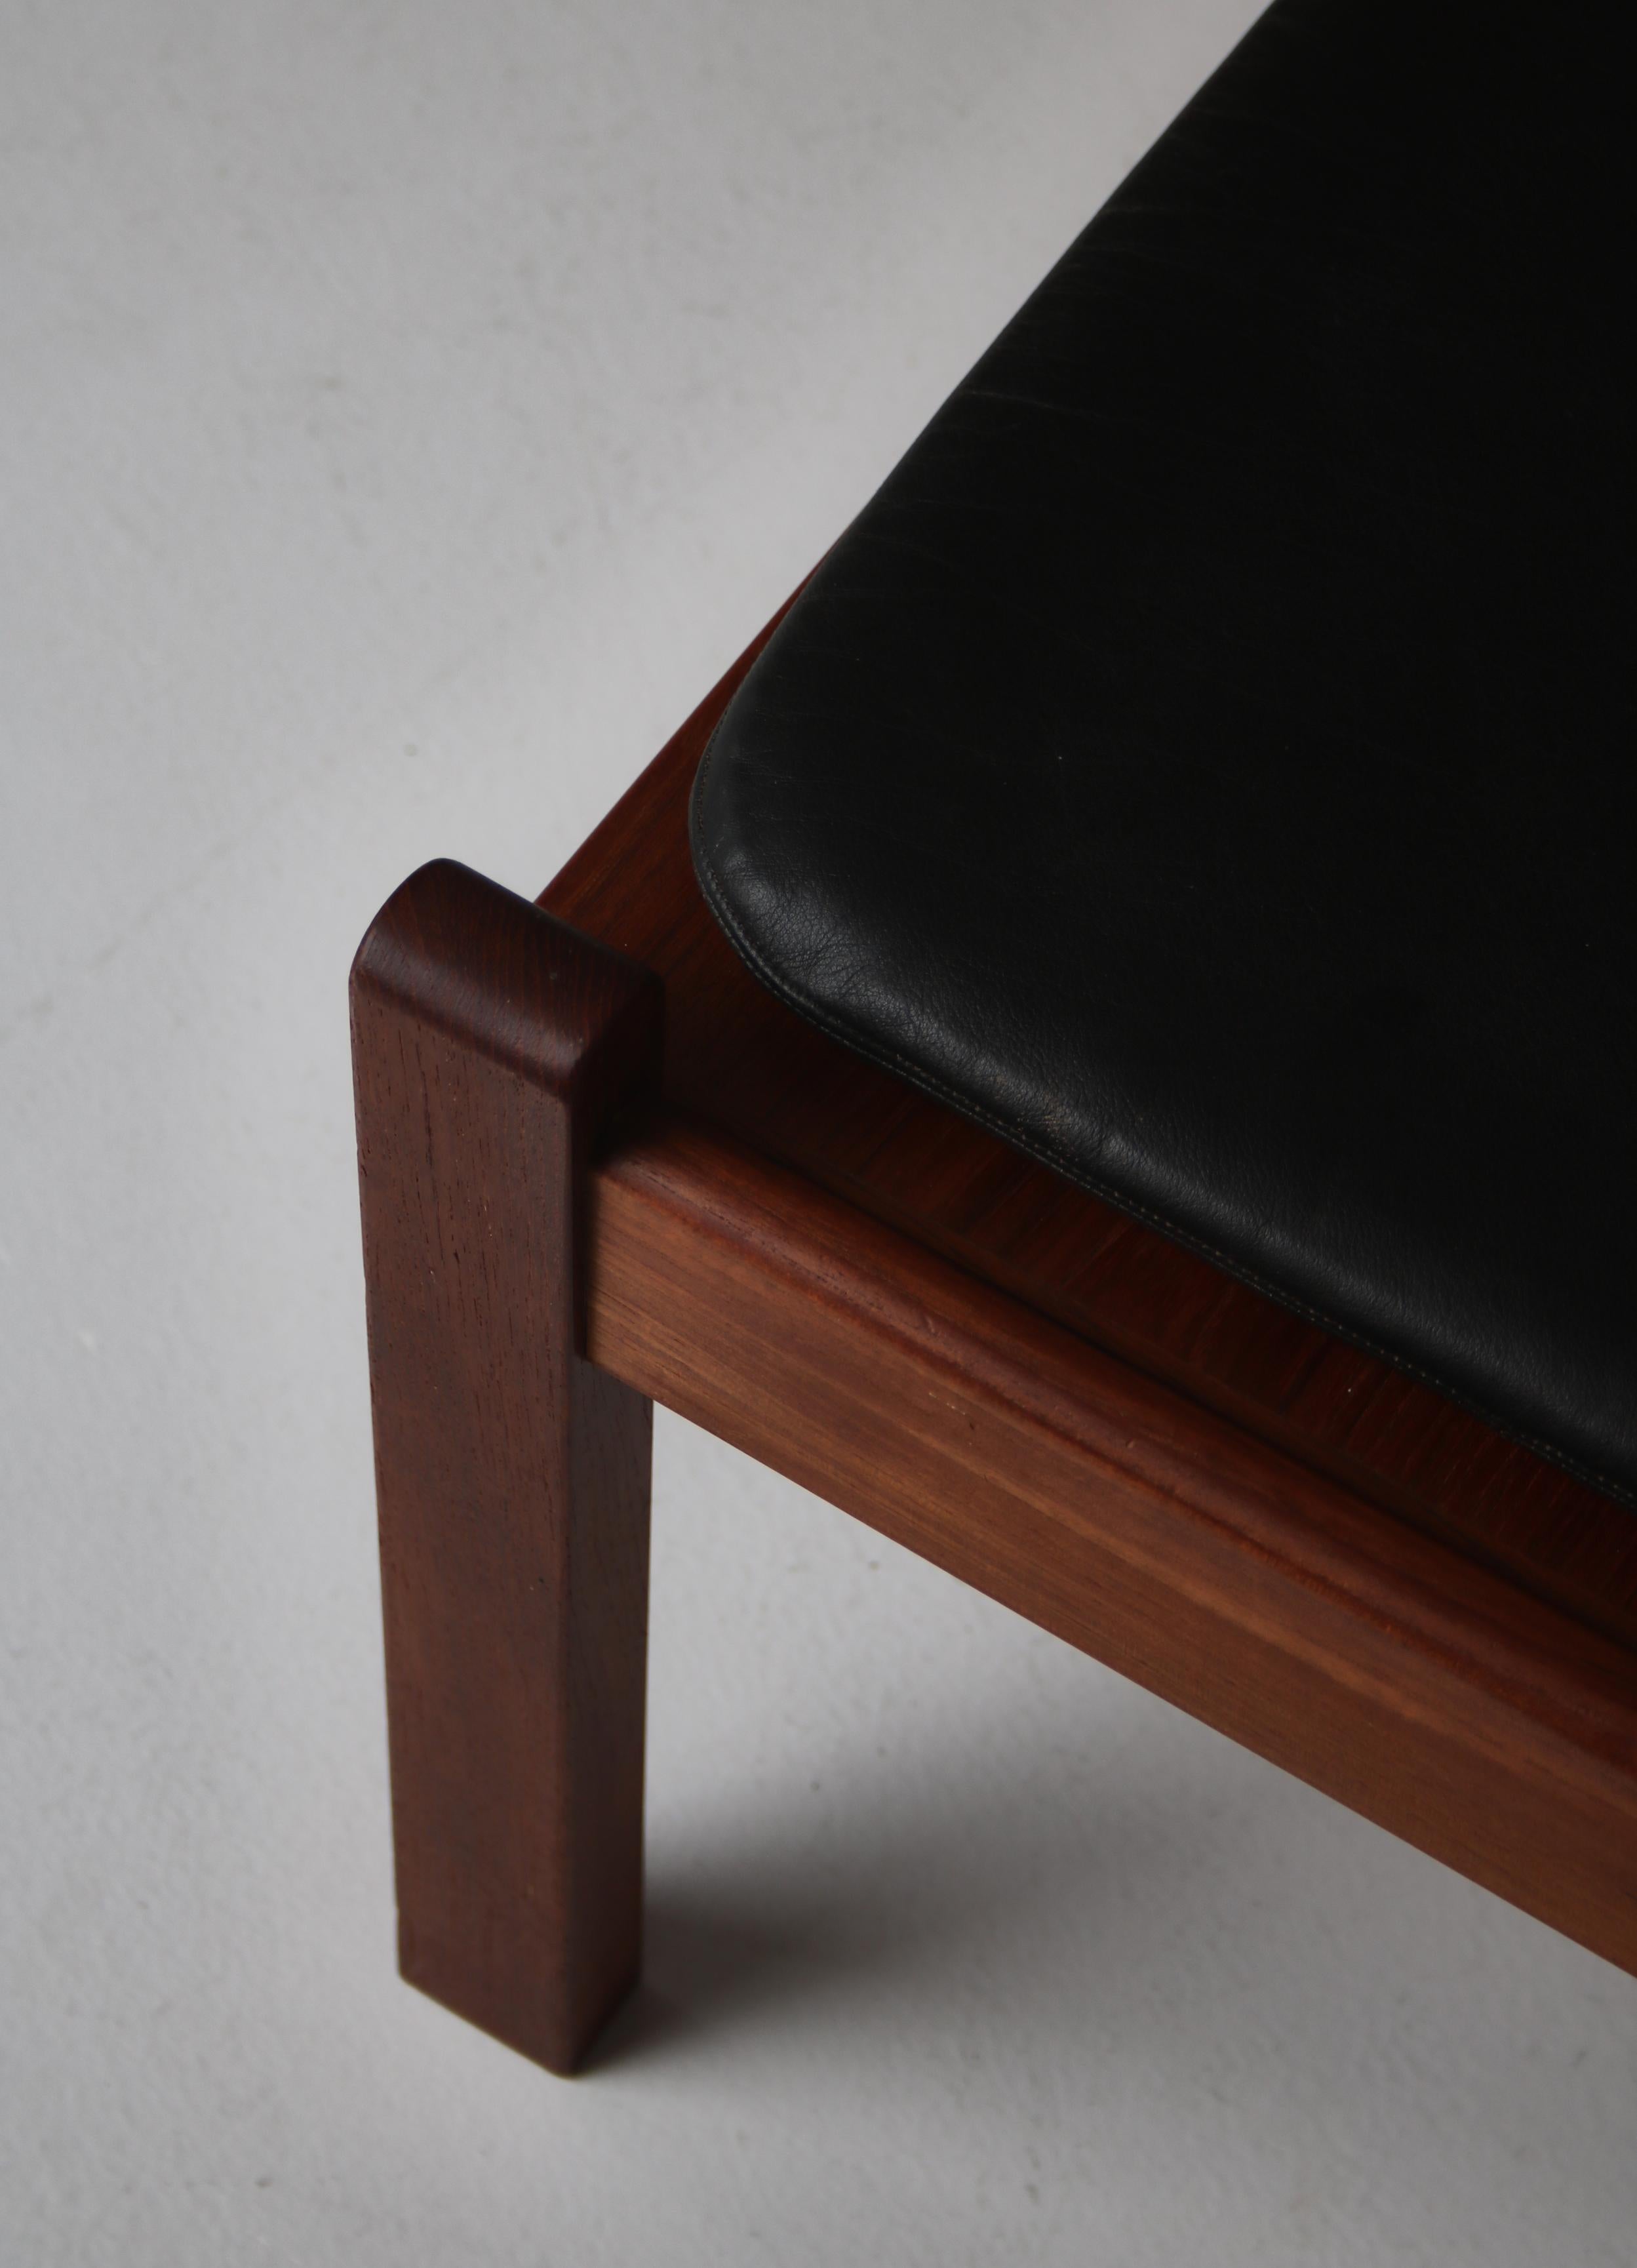 Mid-20th Century Danish Modern Stool / Sidetable in Teakwood and Black Leather, 1960s For Sale